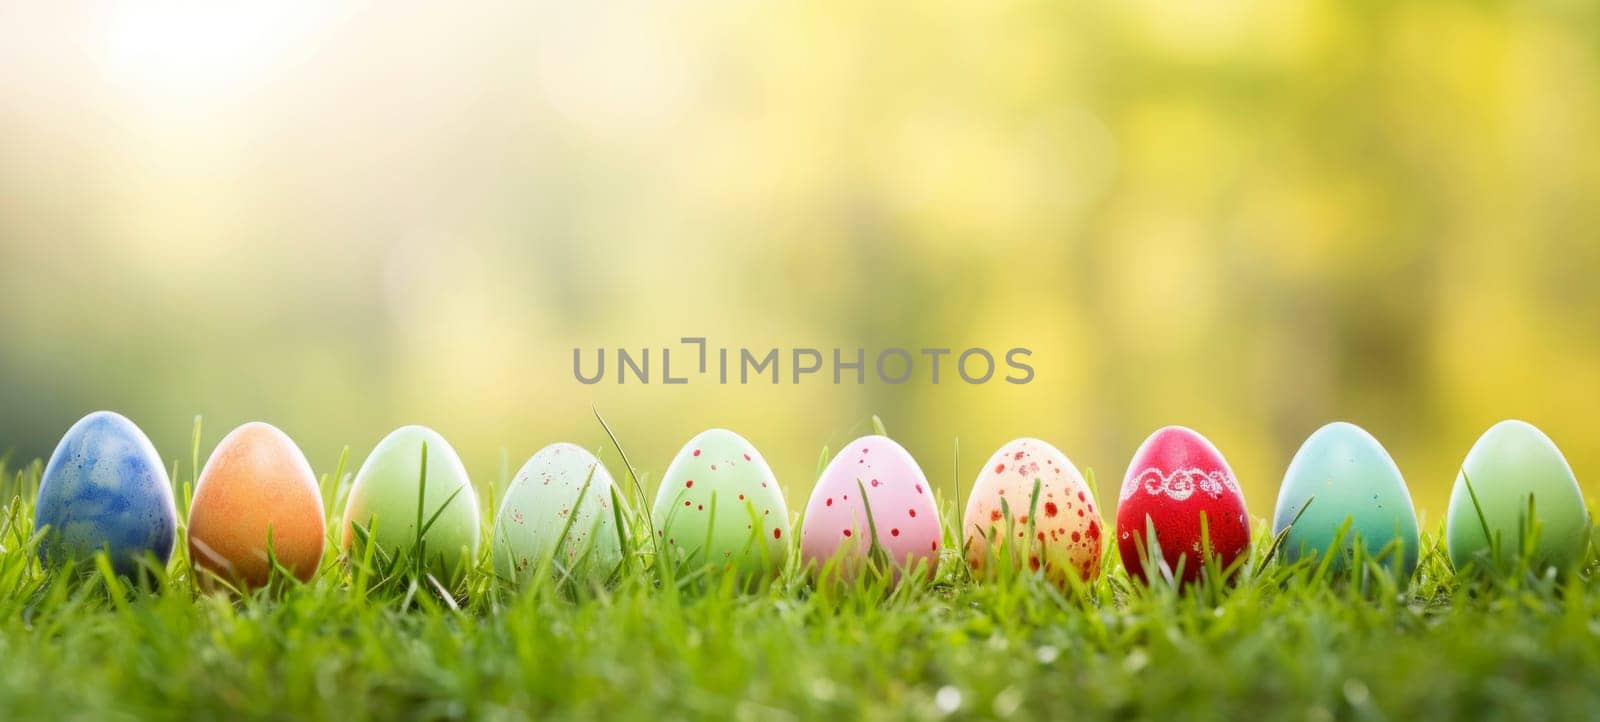 A row of colorful Easter eggs, delicately decorated, nestled in vibrant spring grass against a blurred sunny background.